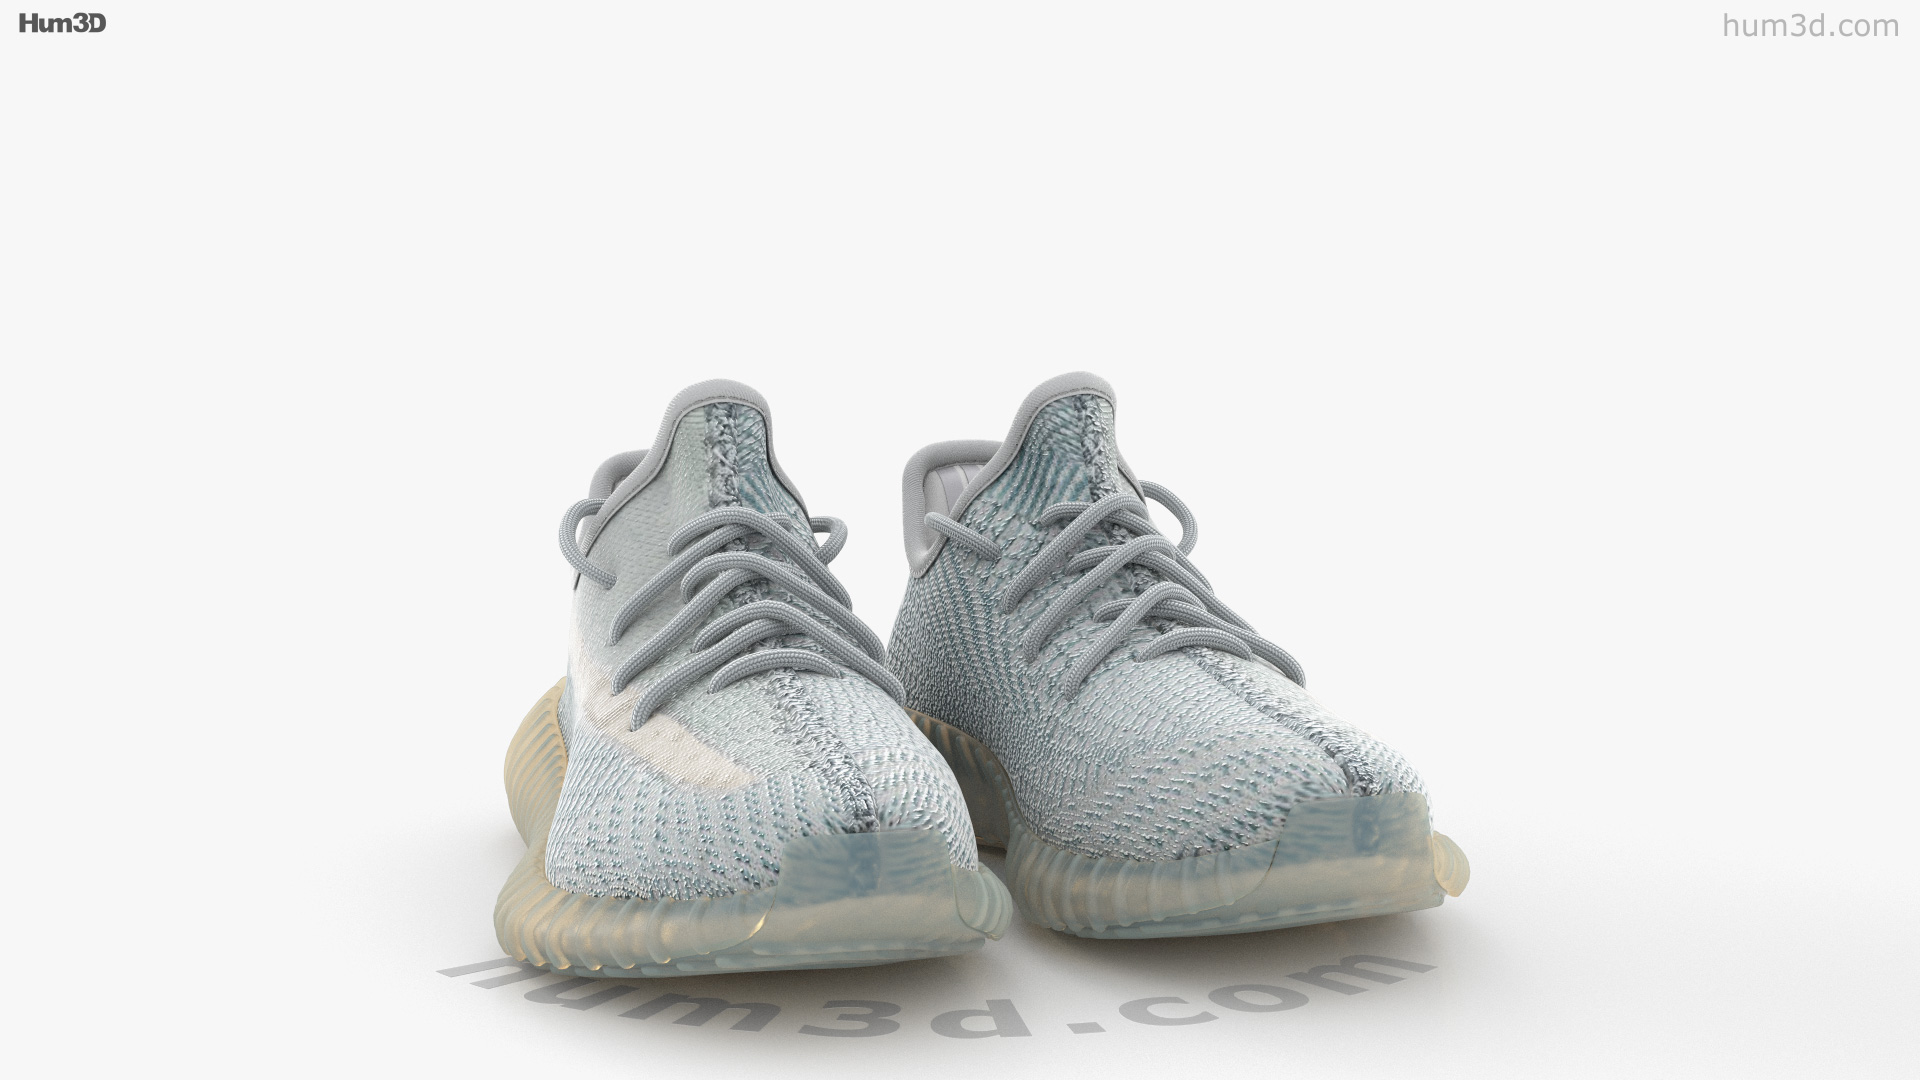 360 view of Adidas Yeezy Boost 350 3D 